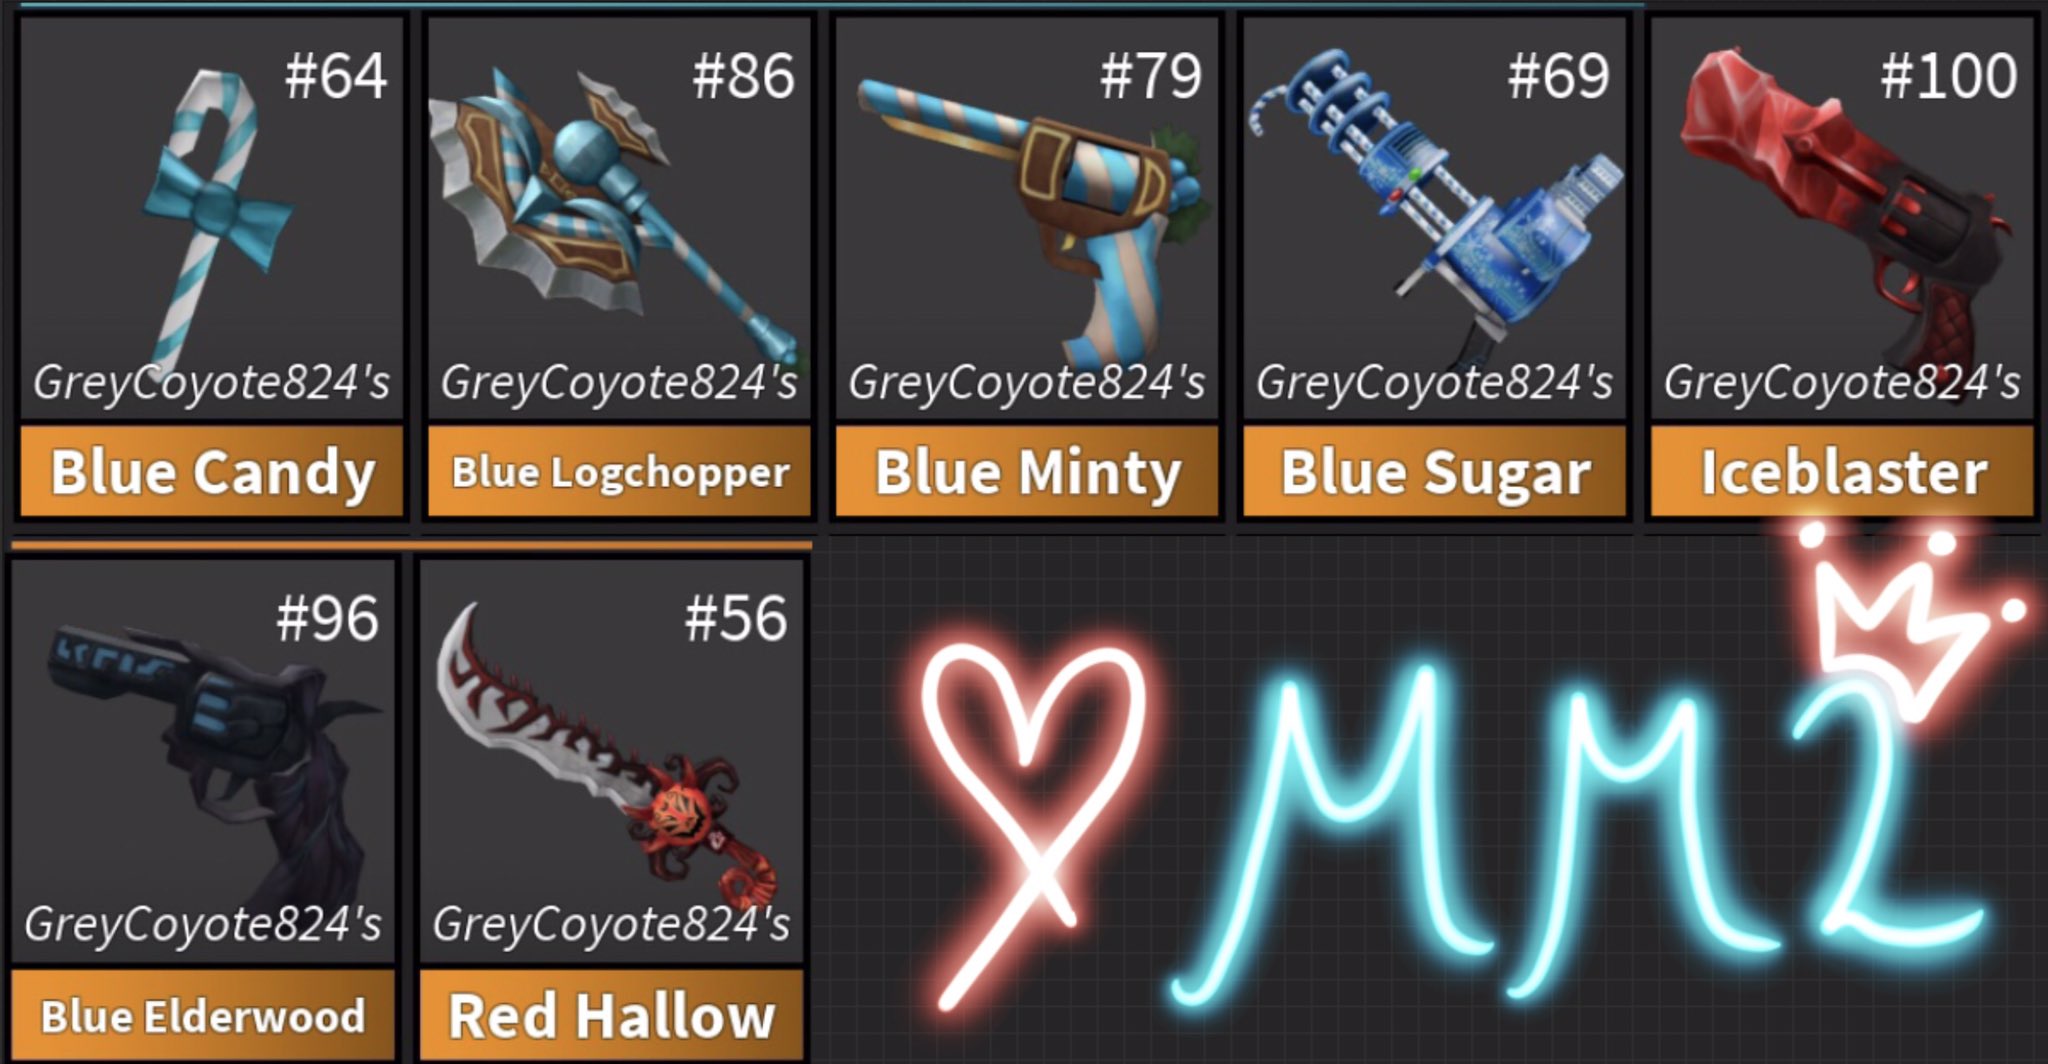 Grey On Twitter Welcome To You New Home 100 Ice Blaster Sitting Happily Next To It S Elder Sibling 69 Blue Sugar And Ofc I Couldn T Resist The New Pink Godly Need - ice gun roblox